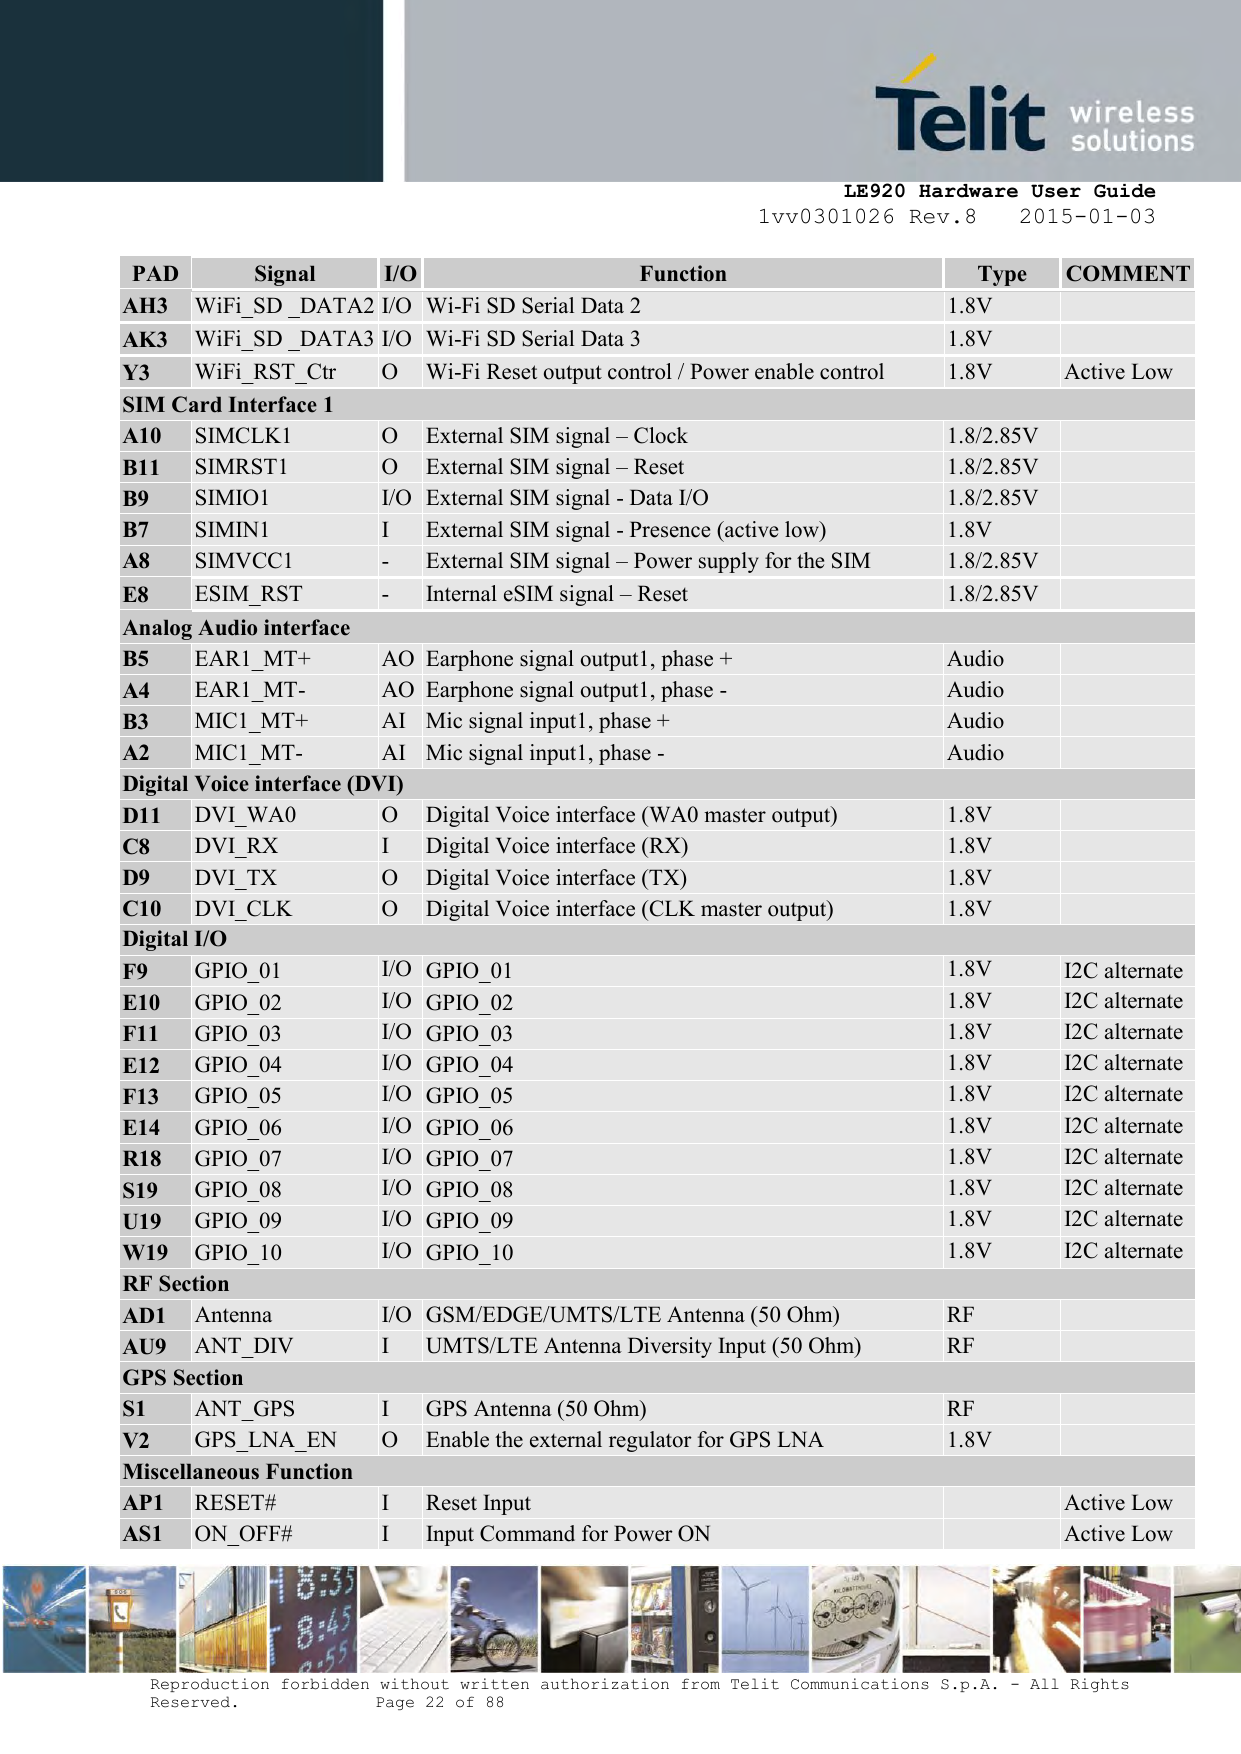     LE920 Hardware User Guide 1vv0301026 Rev.8   2015-01-03 Reproduction forbidden without written authorization from Telit Communications S.p.A. - All Rights Reserved.    Page 22 of 88  PAD Signal I/O Function Type COMMENT AH3 WiFi_SD _DATA2 I/O Wi-Fi SD Serial Data 2 1.8V   AK3 WiFi_SD _DATA3 I/O Wi-Fi SD Serial Data 3 1.8V   Y3 WiFi_RST_Ctr O Wi-Fi Reset output control / Power enable control 1.8V Active Low  SIM Card Interface 1 A10 SIMCLK1 O External SIM signal – Clock 1.8/2.85V  B11 SIMRST1 O External SIM signal – Reset 1.8/2.85V  B9 SIMIO1 I/O External SIM signal - Data I/O 1.8/2.85V  B7 SIMIN1 I External SIM signal - Presence (active low) 1.8V  A8 SIMVCC1 - External SIM signal – Power supply for the SIM 1.8/2.85V  E8 ESIM_RST - Internal eSIM signal – Reset 1.8/2.85V  Analog Audio interface B5 EAR1_MT+ AO Earphone signal output1, phase + Audio  A4 EAR1_MT- AO Earphone signal output1, phase - Audio  B3 MIC1_MT+ AI Mic signal input1, phase + Audio  A2 MIC1_MT- AI Mic signal input1, phase - Audio  Digital Voice interface (DVI) D11 DVI_WA0 O Digital Voice interface (WA0 master output) 1.8V  C8 DVI_RX I Digital Voice interface (RX) 1.8V  D9 DVI_TX O Digital Voice interface (TX) 1.8V  C10 DVI_CLK O Digital Voice interface (CLK master output) 1.8V  Digital I/O F9 GPIO_01 I/O GPIO_01 1.8V I2C alternate E10 GPIO_02 I/O GPIO_02 1.8V I2C alternate F11 GPIO_03 I/O GPIO_03 1.8V I2C alternate E12 GPIO_04 I/O GPIO_04 1.8V I2C alternate F13 GPIO_05 I/O GPIO_05 1.8V I2C alternate E14 GPIO_06 I/O GPIO_06 1.8V I2C alternate R18 GPIO_07 I/O GPIO_07 1.8V I2C alternate S19 GPIO_08 I/O GPIO_08 1.8V I2C alternate U19 GPIO_09 I/O GPIO_09 1.8V I2C alternate W19 GPIO_10 I/O GPIO_10 1.8V I2C alternate RF Section AD1 Antenna I/O GSM/EDGE/UMTS/LTE Antenna (50 Ohm) RF  AU9 ANT_DIV I UMTS/LTE Antenna Diversity Input (50 Ohm) RF  GPS Section S1 ANT_GPS I GPS Antenna (50 Ohm) RF  V2 GPS_LNA_EN O Enable the external regulator for GPS LNA 1.8V  Miscellaneous Function AP1 RESET# I Reset Input  Active Low AS1 ON_OFF#  I Input Command for Power ON  Active Low 